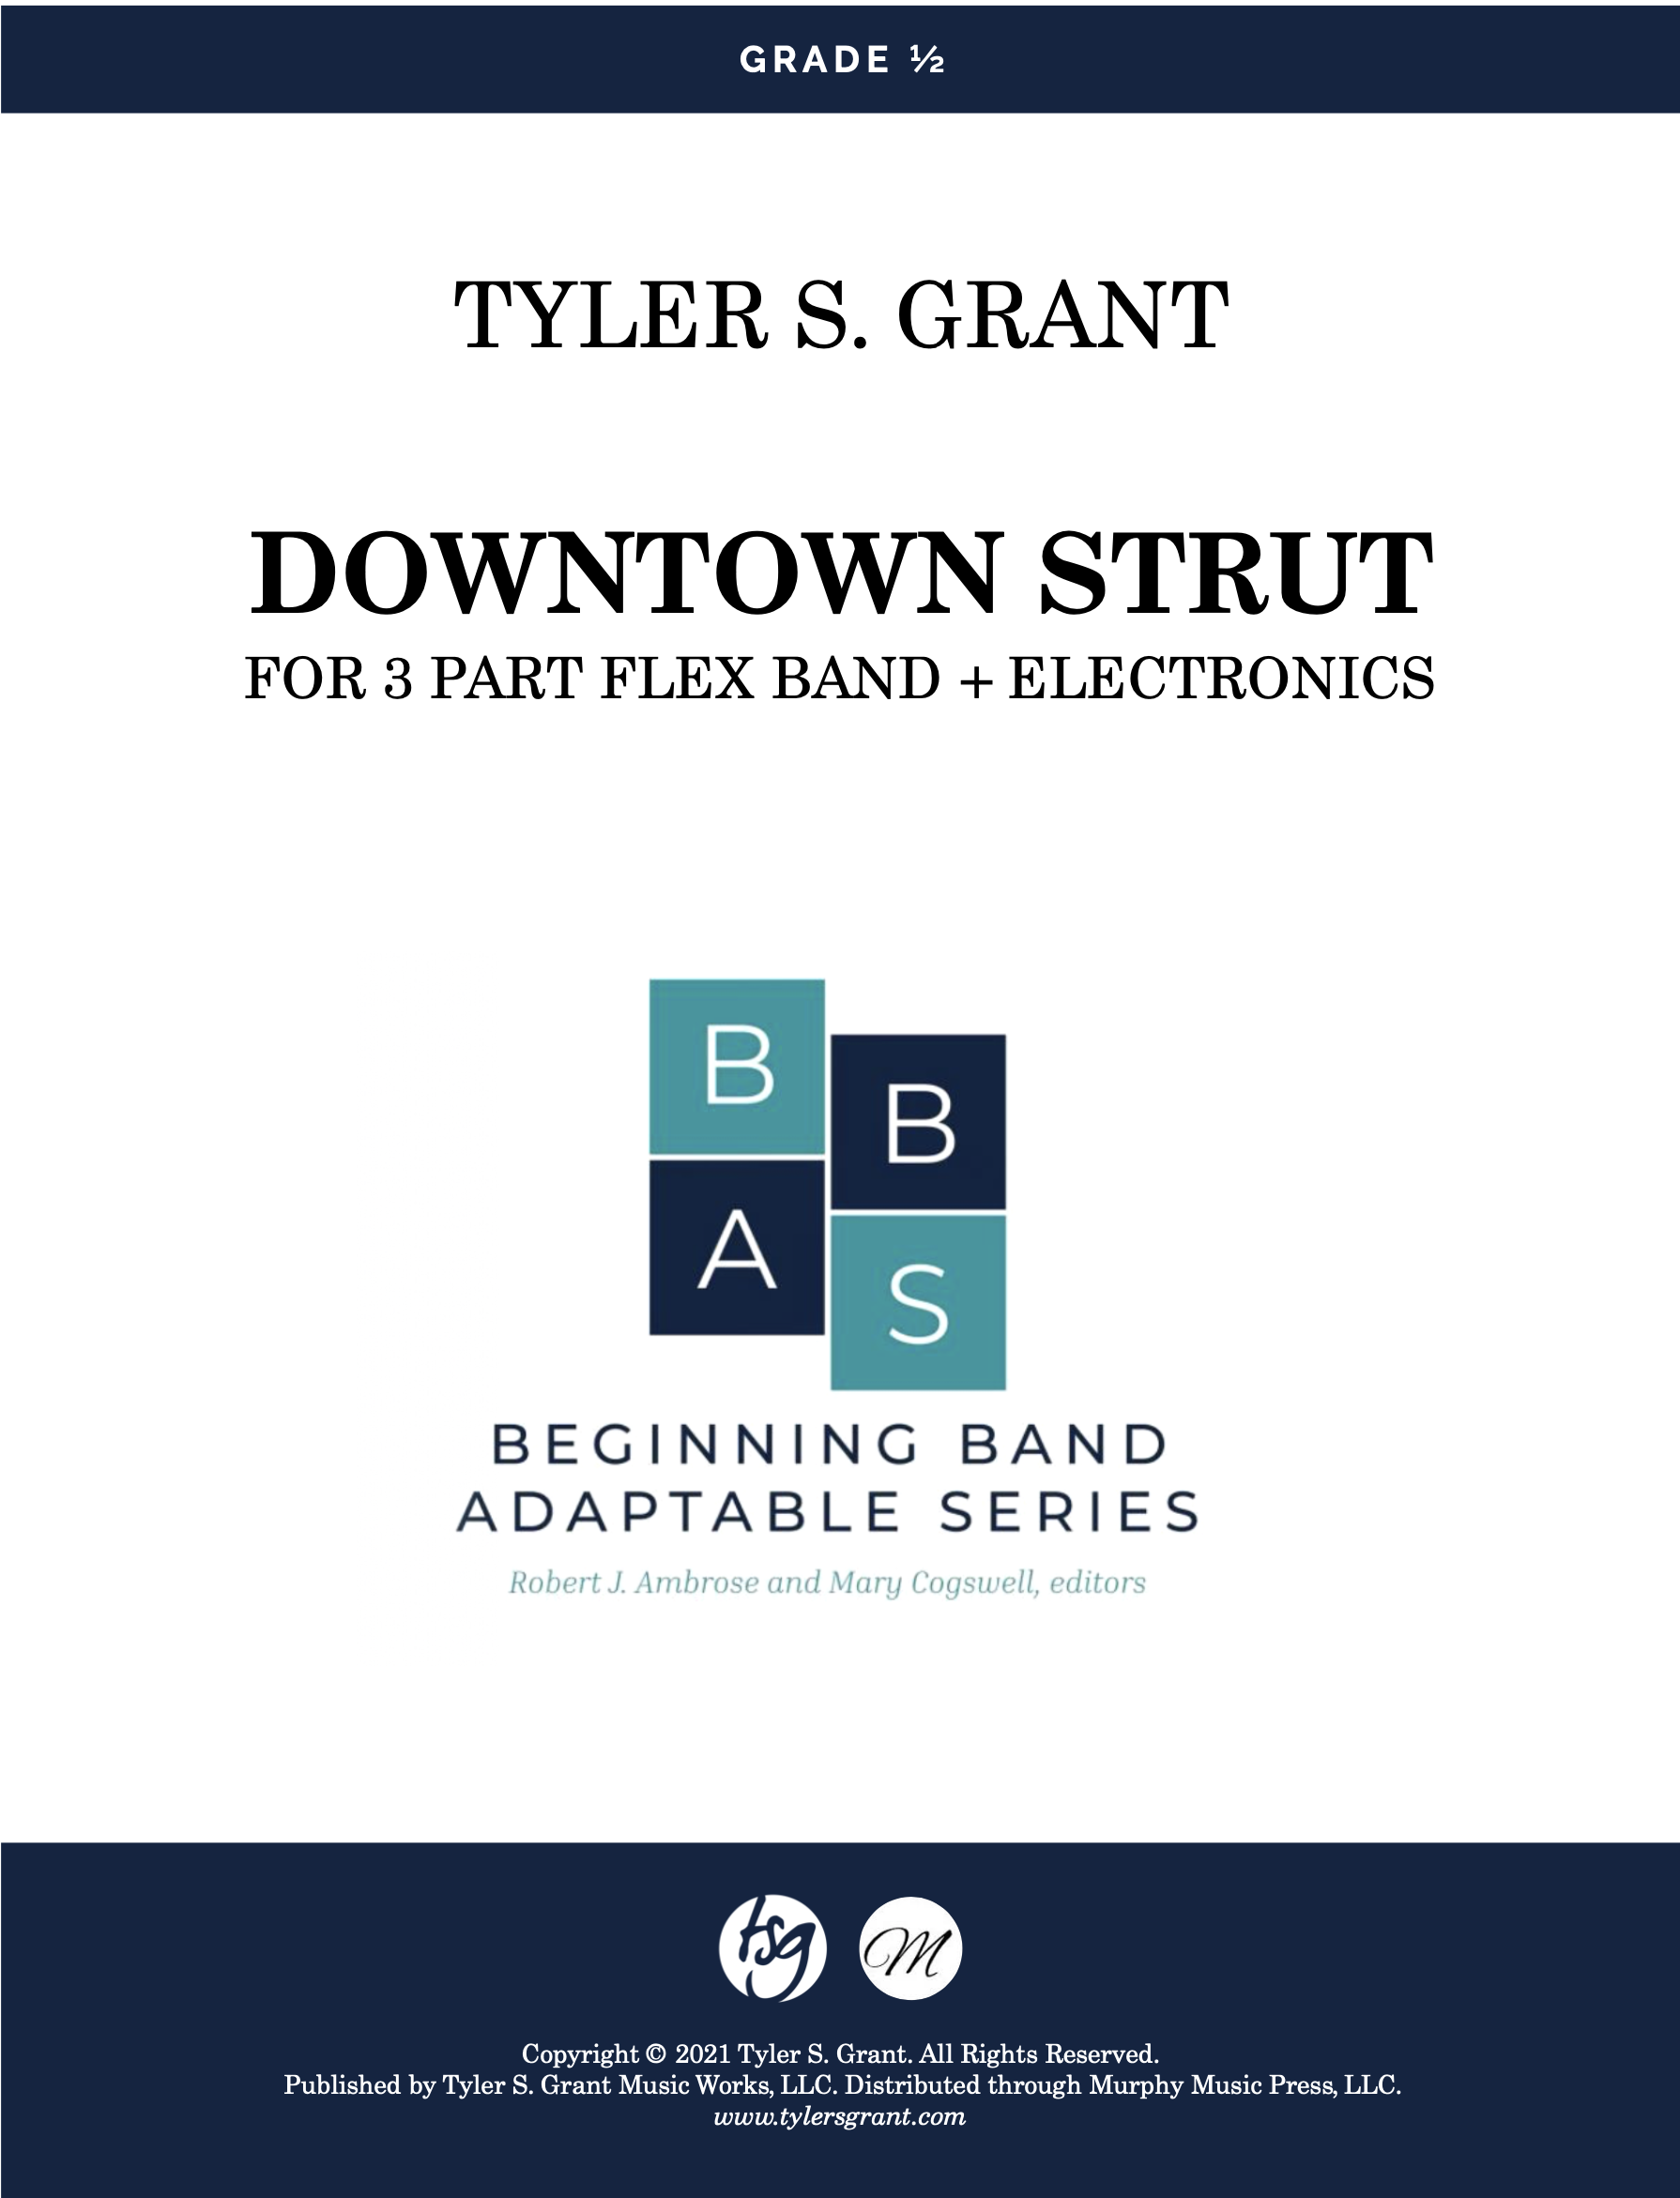 Downtown Strut by Tyler S. Grant